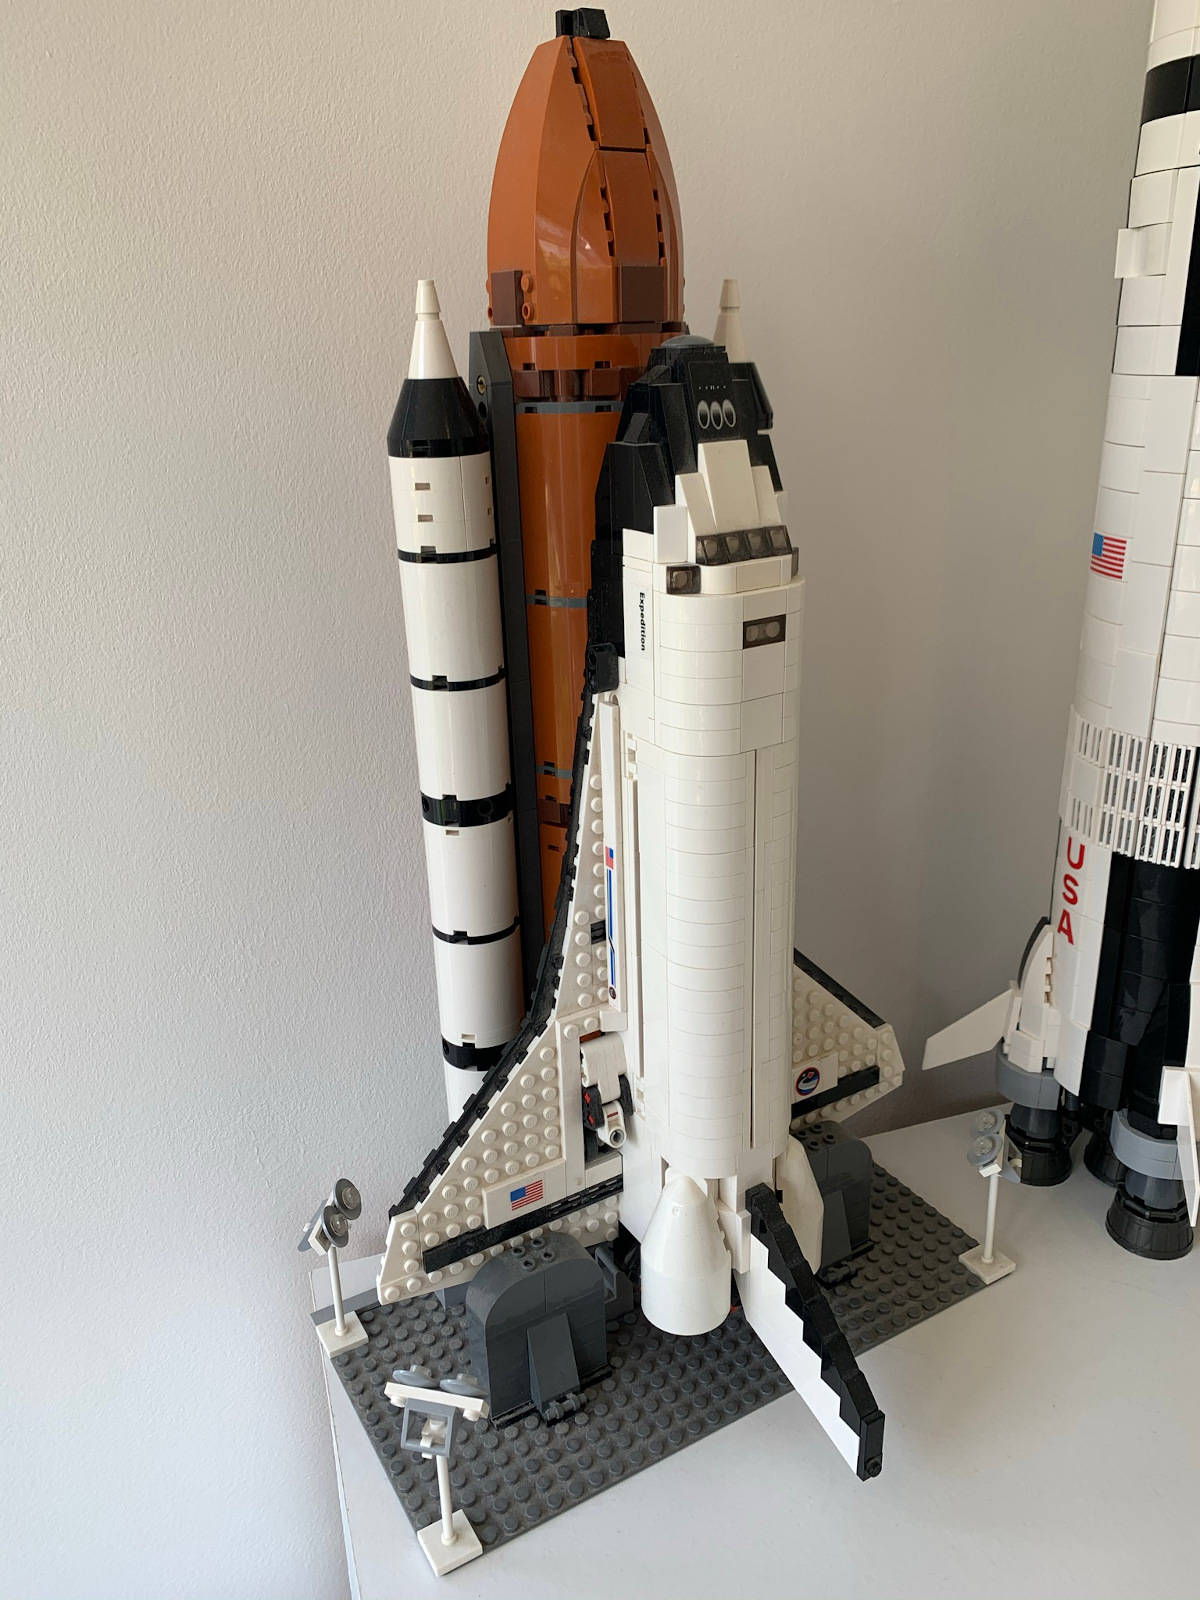 may 2011 space shuttle endeavor lego sets test gravity